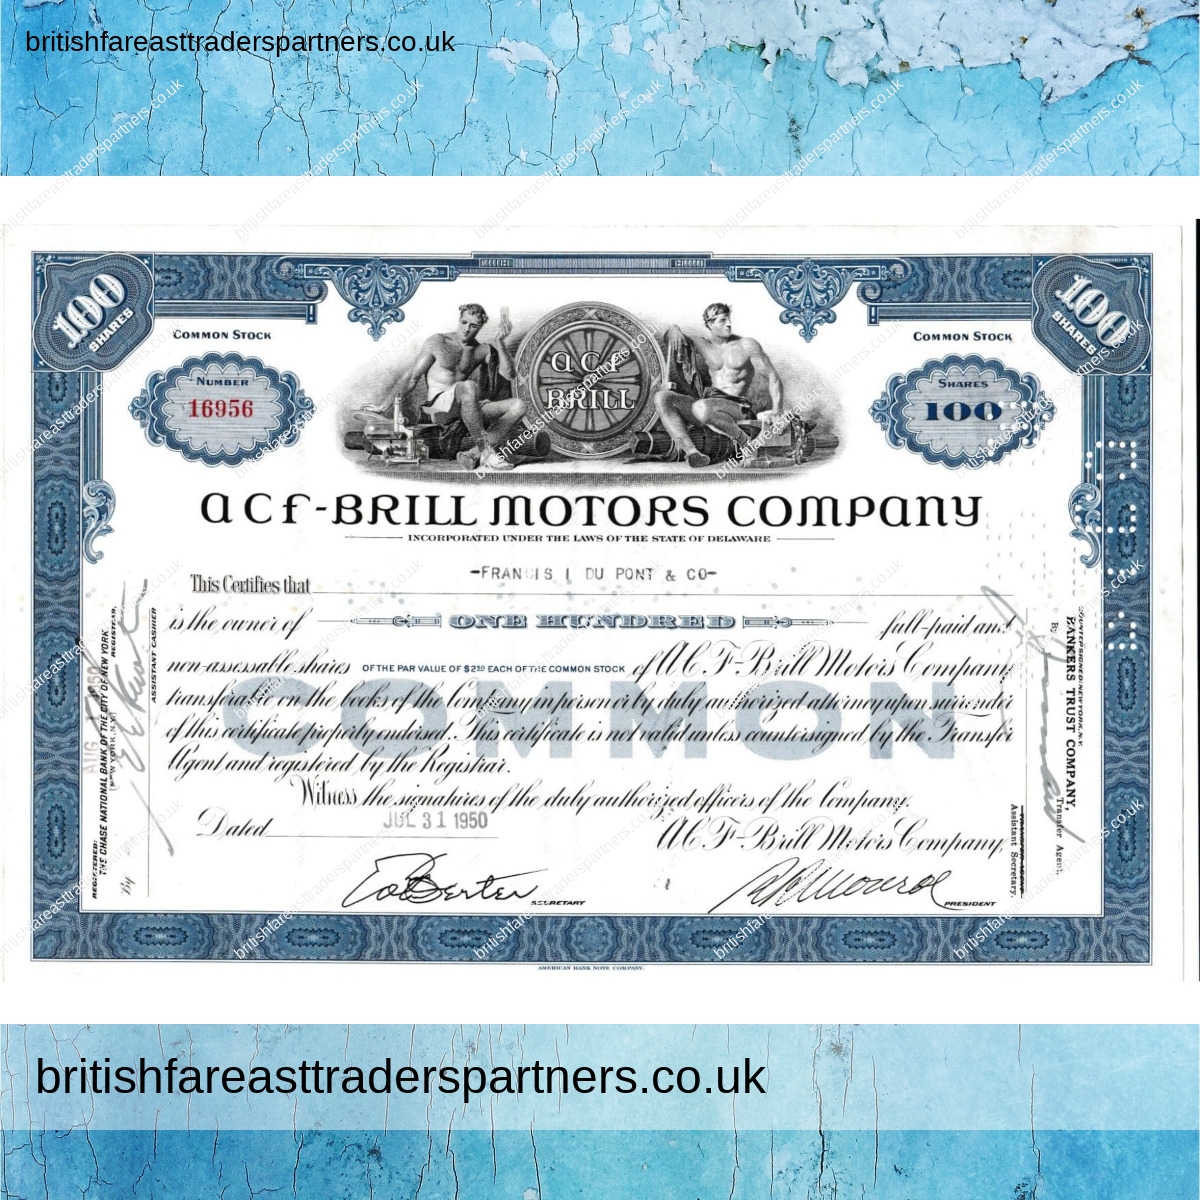 VINTAGE STOCK / SHARE CERTIFICATE “ACF-BRILL MOTORS COMPANY” COLLECTABLE DOCUMENTS | SHARE CERTIFICATES | COMPANIES | WORLD | SCRIPOPHILY | BUSINESS | INVESTMENTS